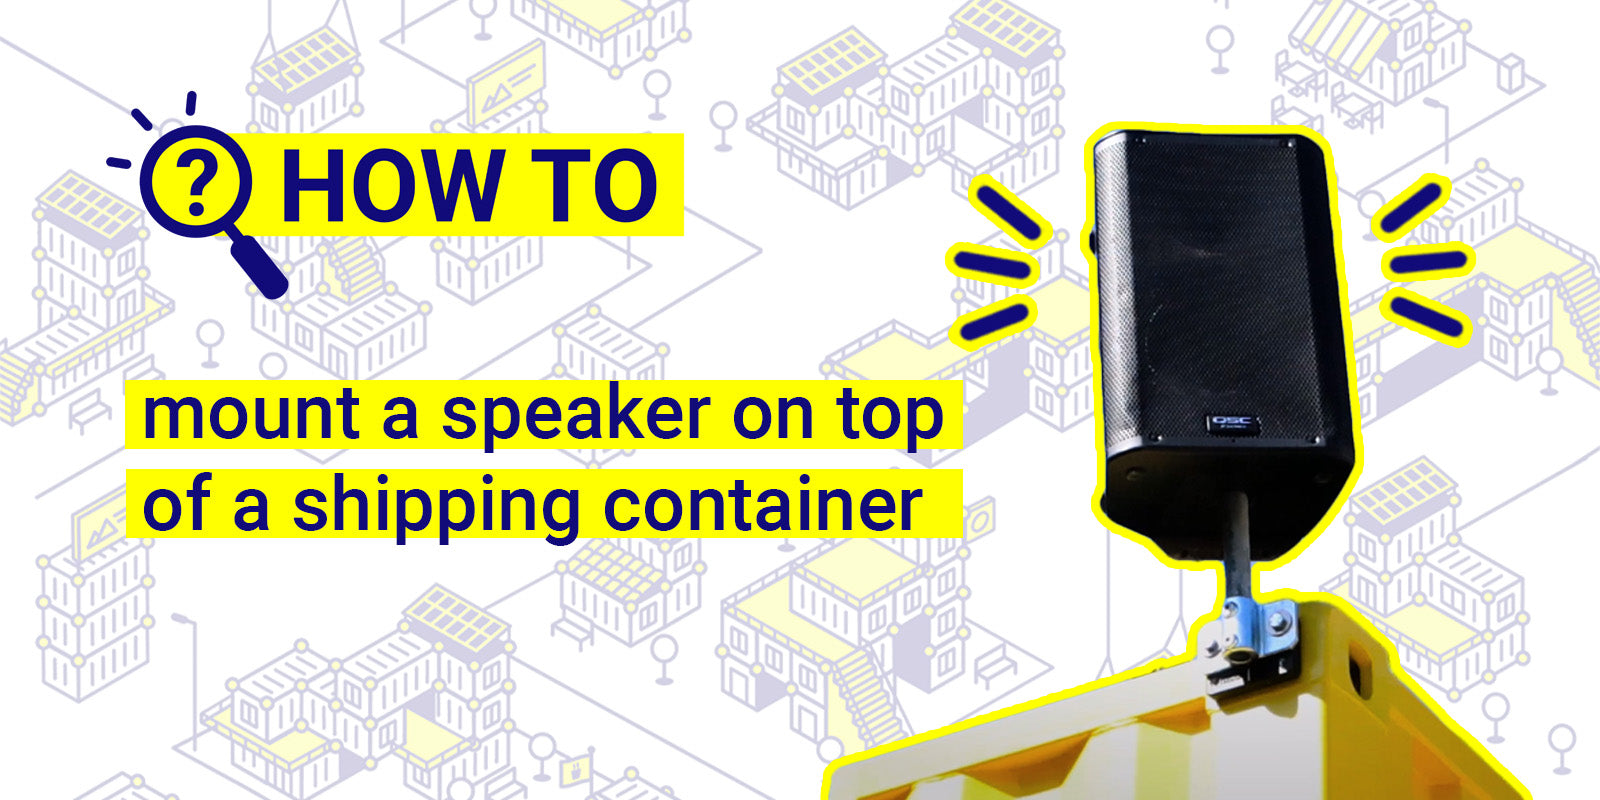 How to mount a speaker on top of a shipping container.